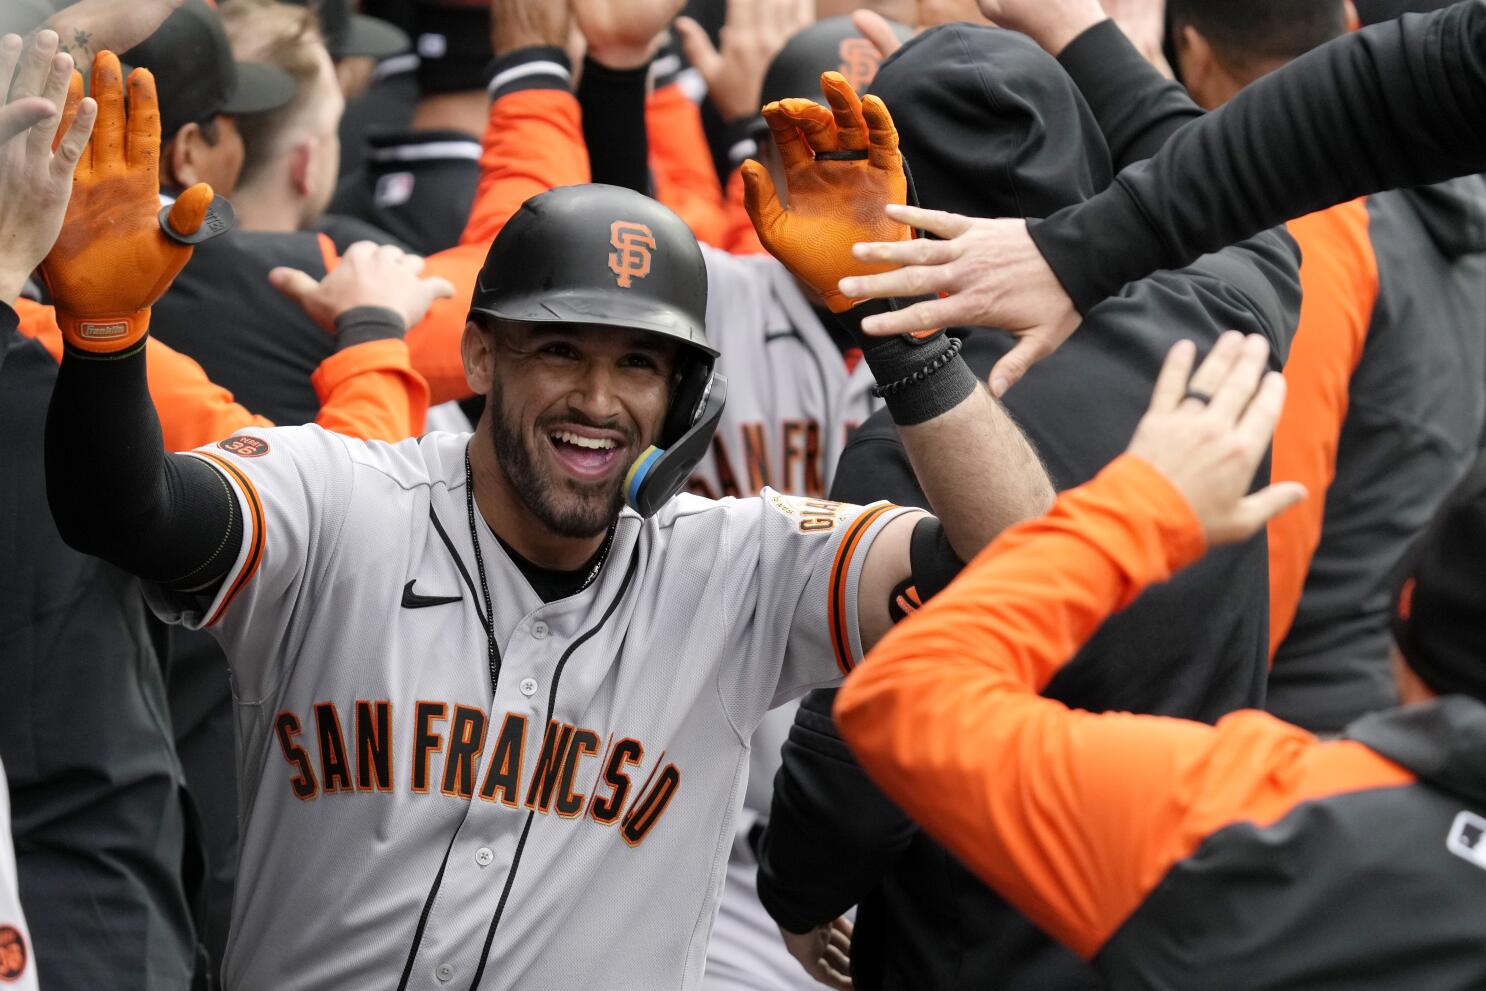 Villar goes deep twice, Giants hit 7 HRs to rout White Sox - The San Diego  Union-Tribune